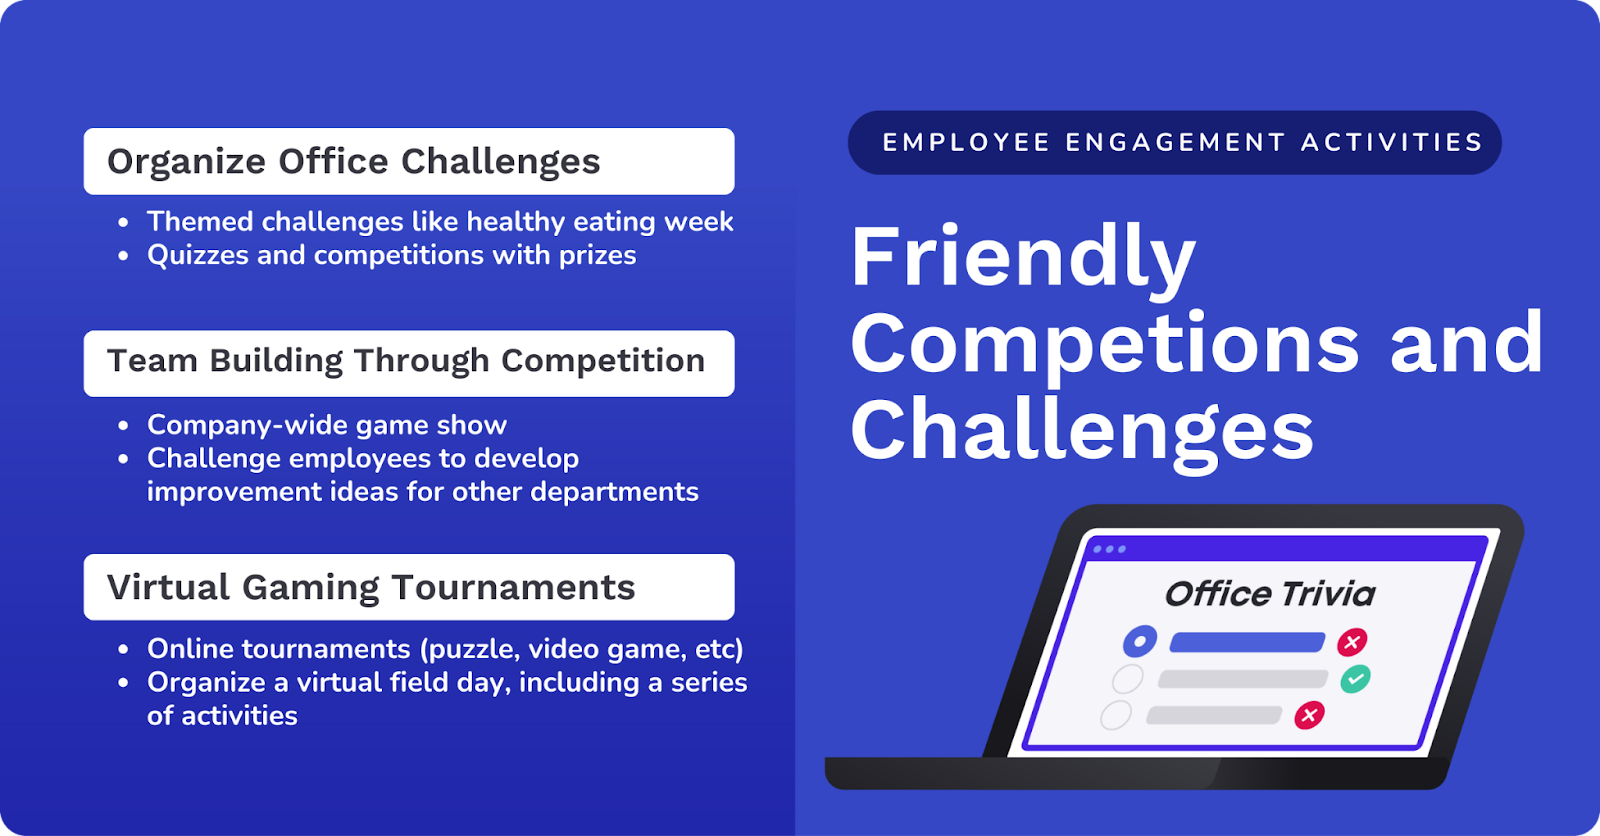 employee engagement activities: friendly competitions